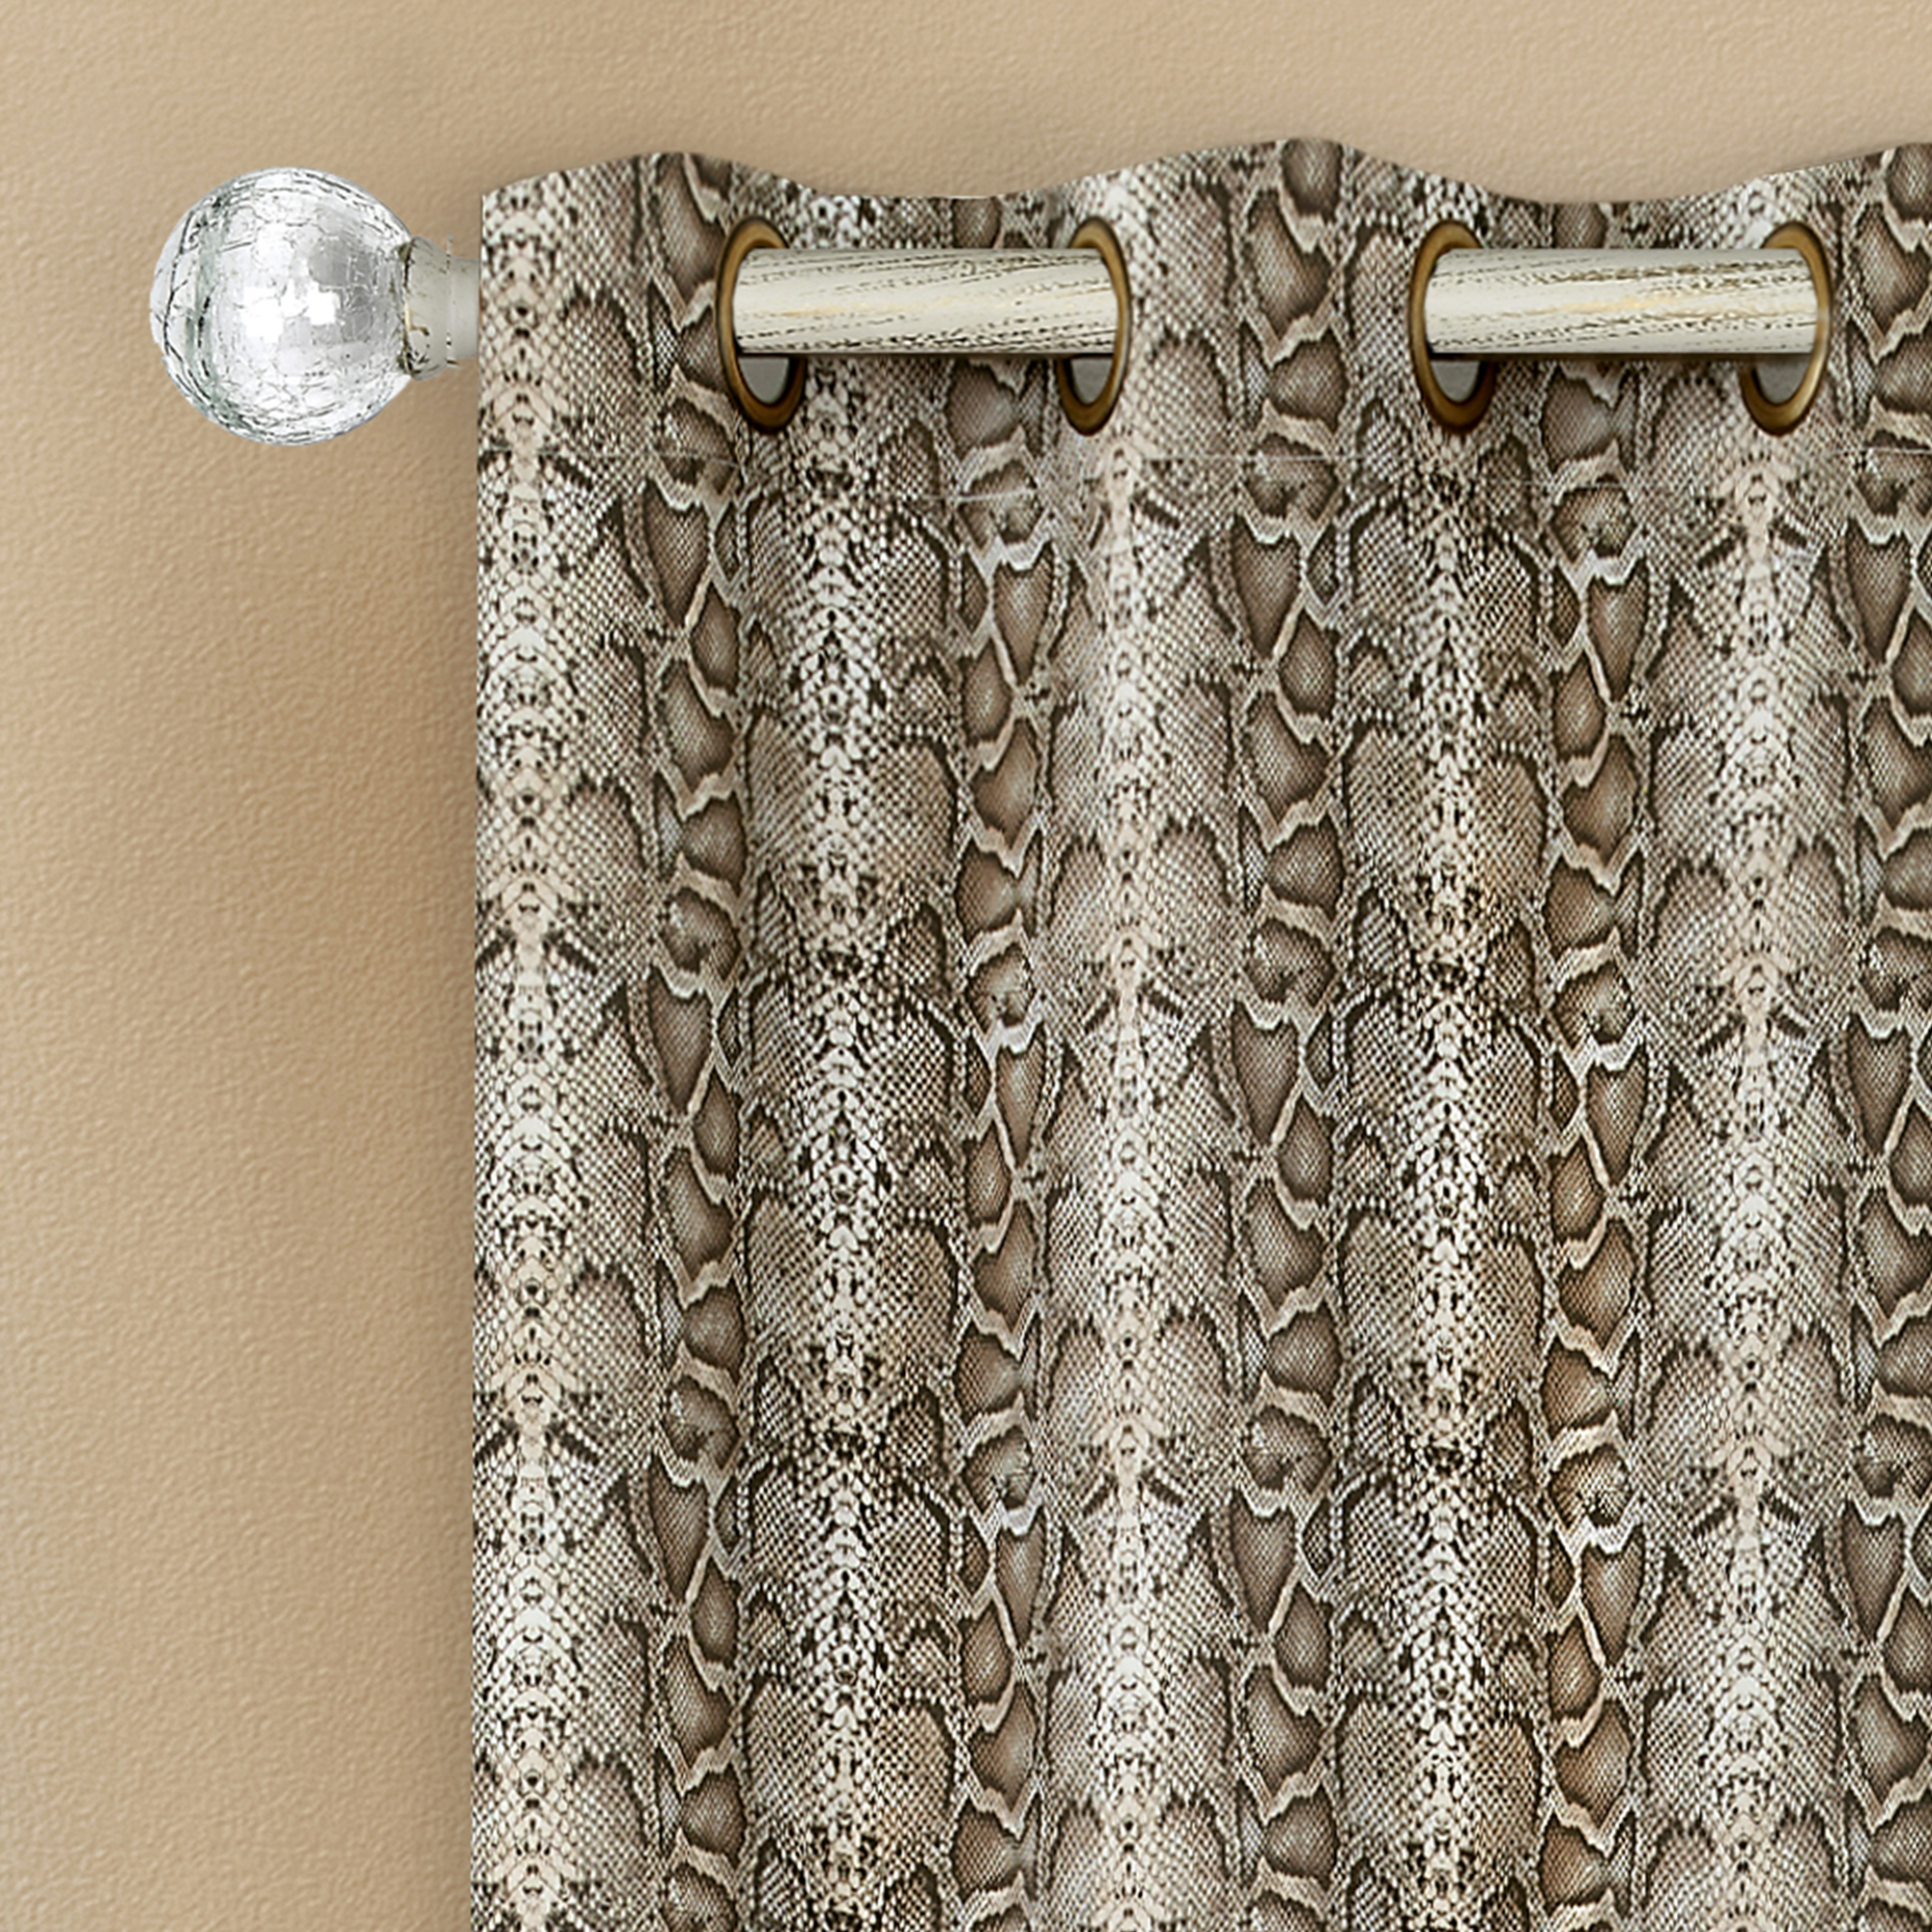 Achim Python Polyester Blackout Window Curtain Panel, Brown/Gold, 52" x 84" - image 4 of 5